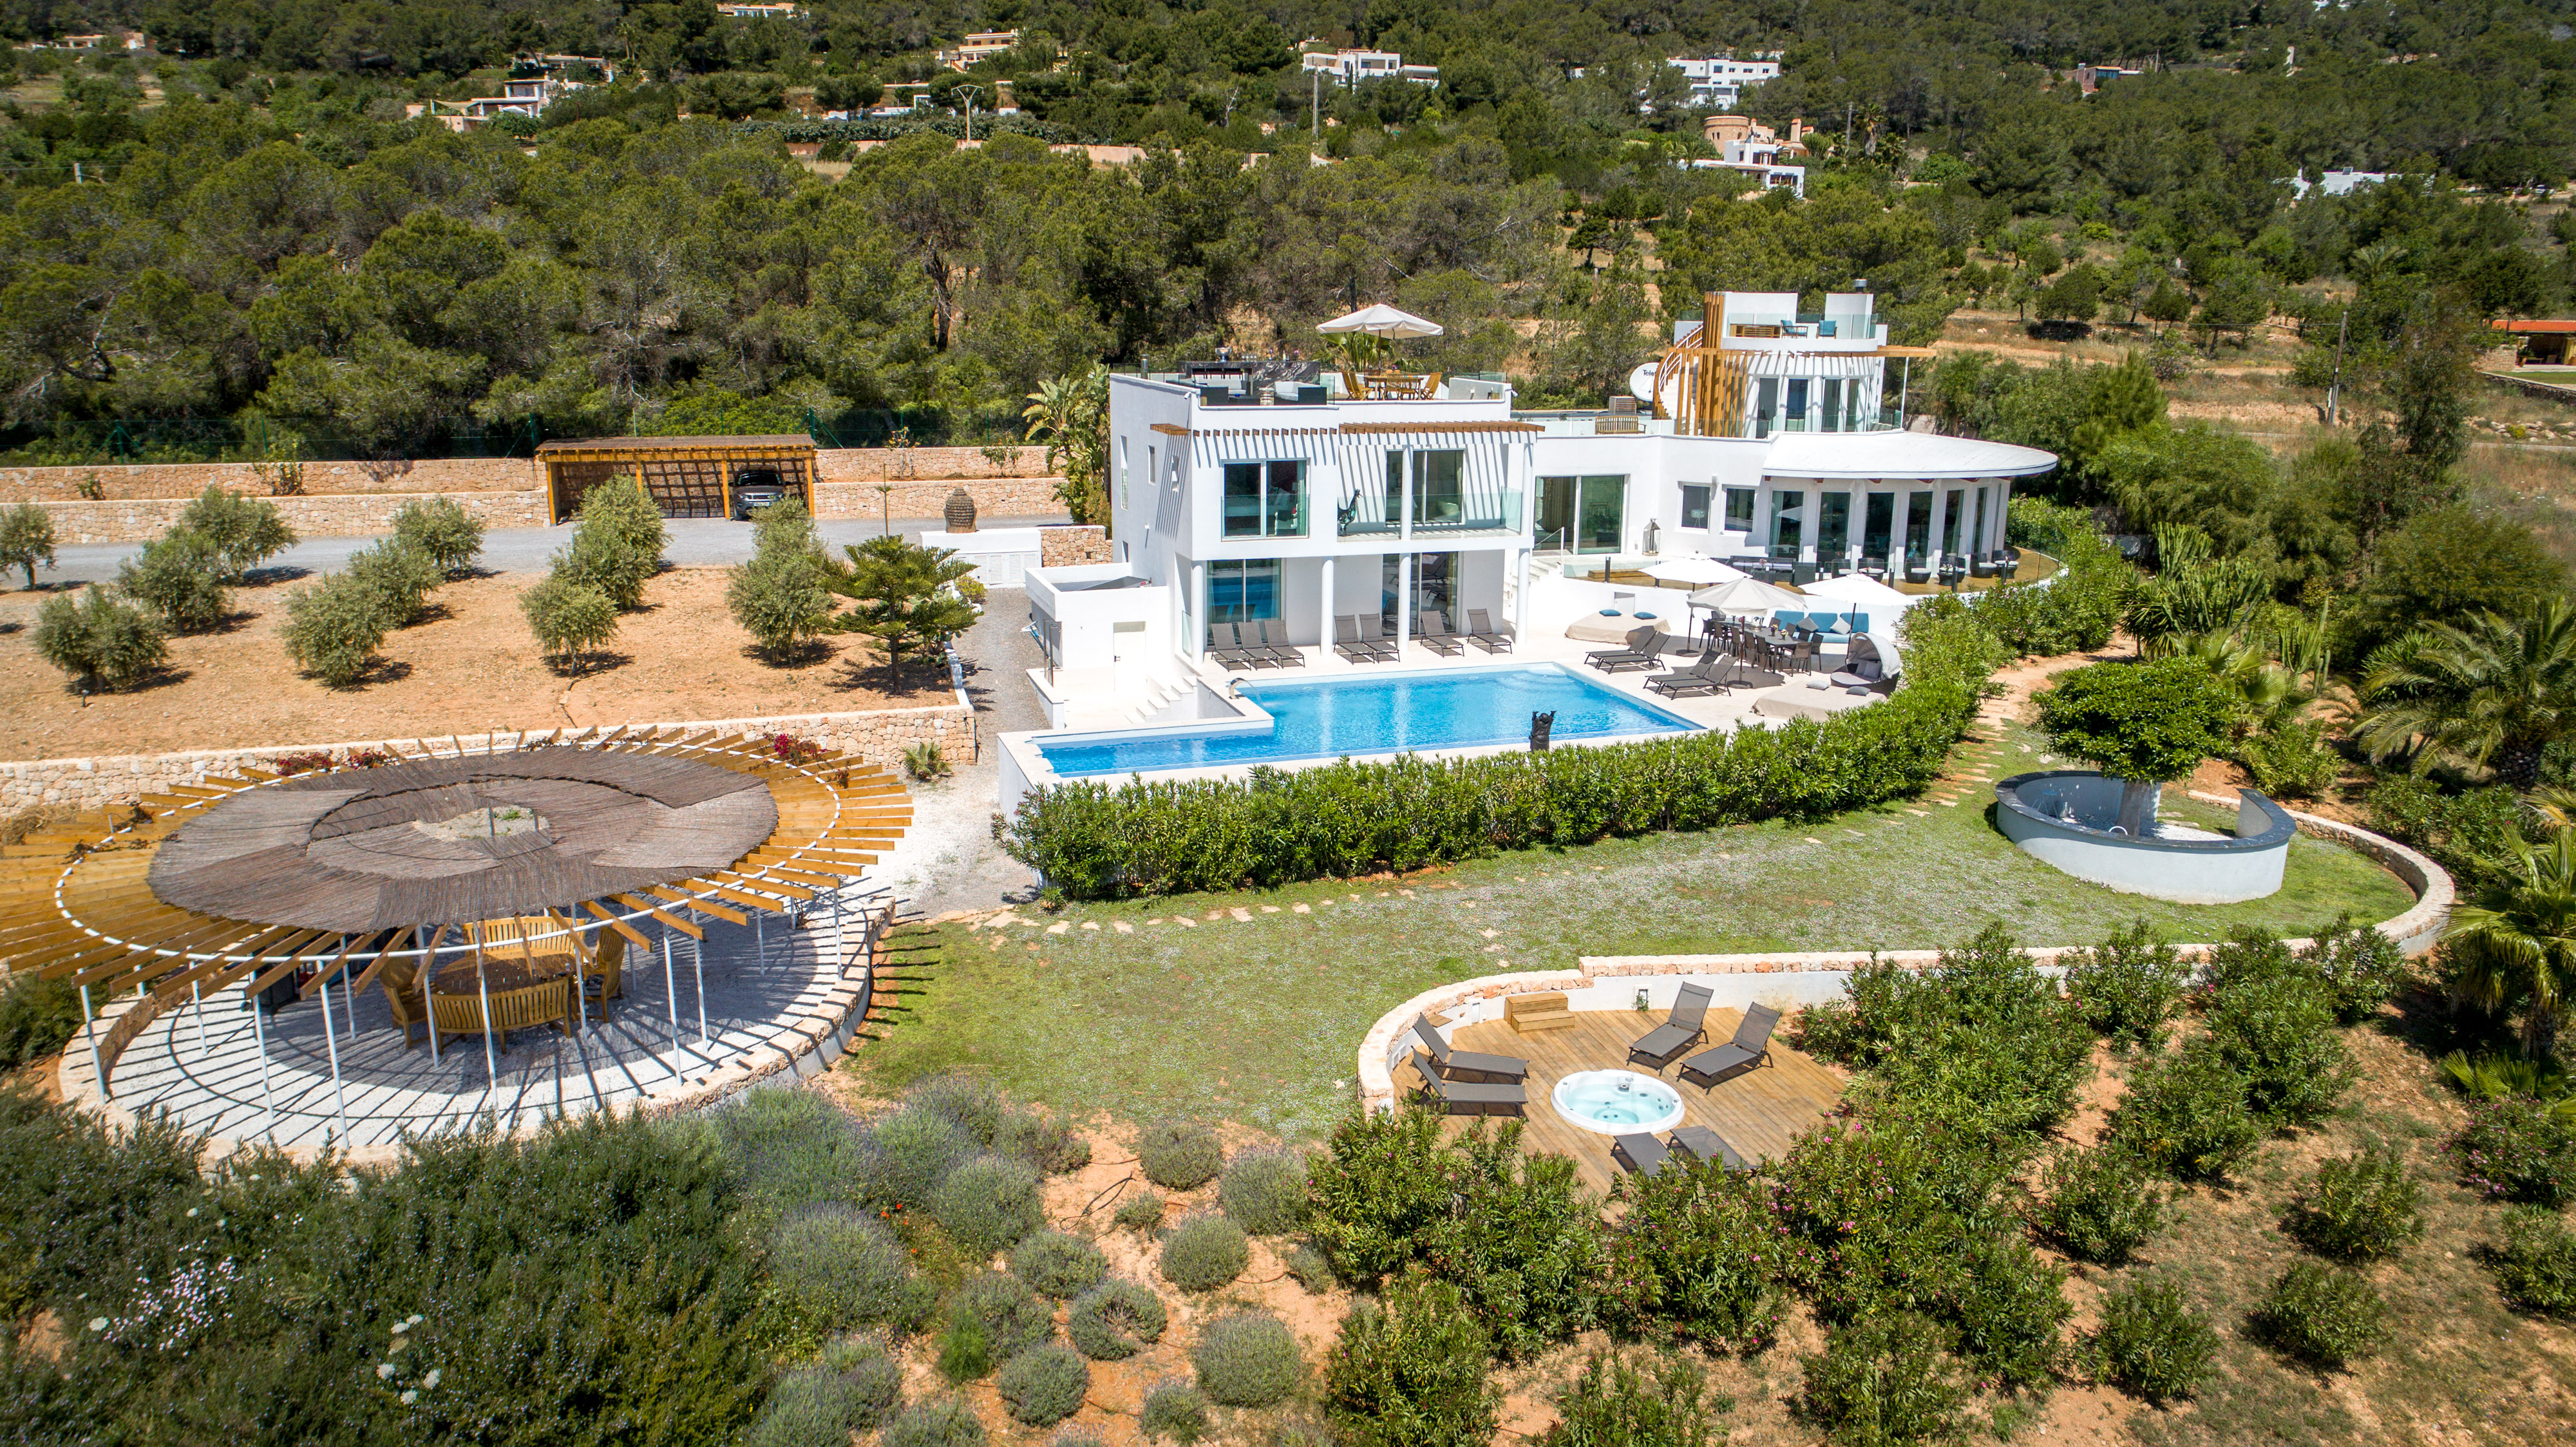 Rent a villa in Ibiza in October and enjoy a peaceful time on the island